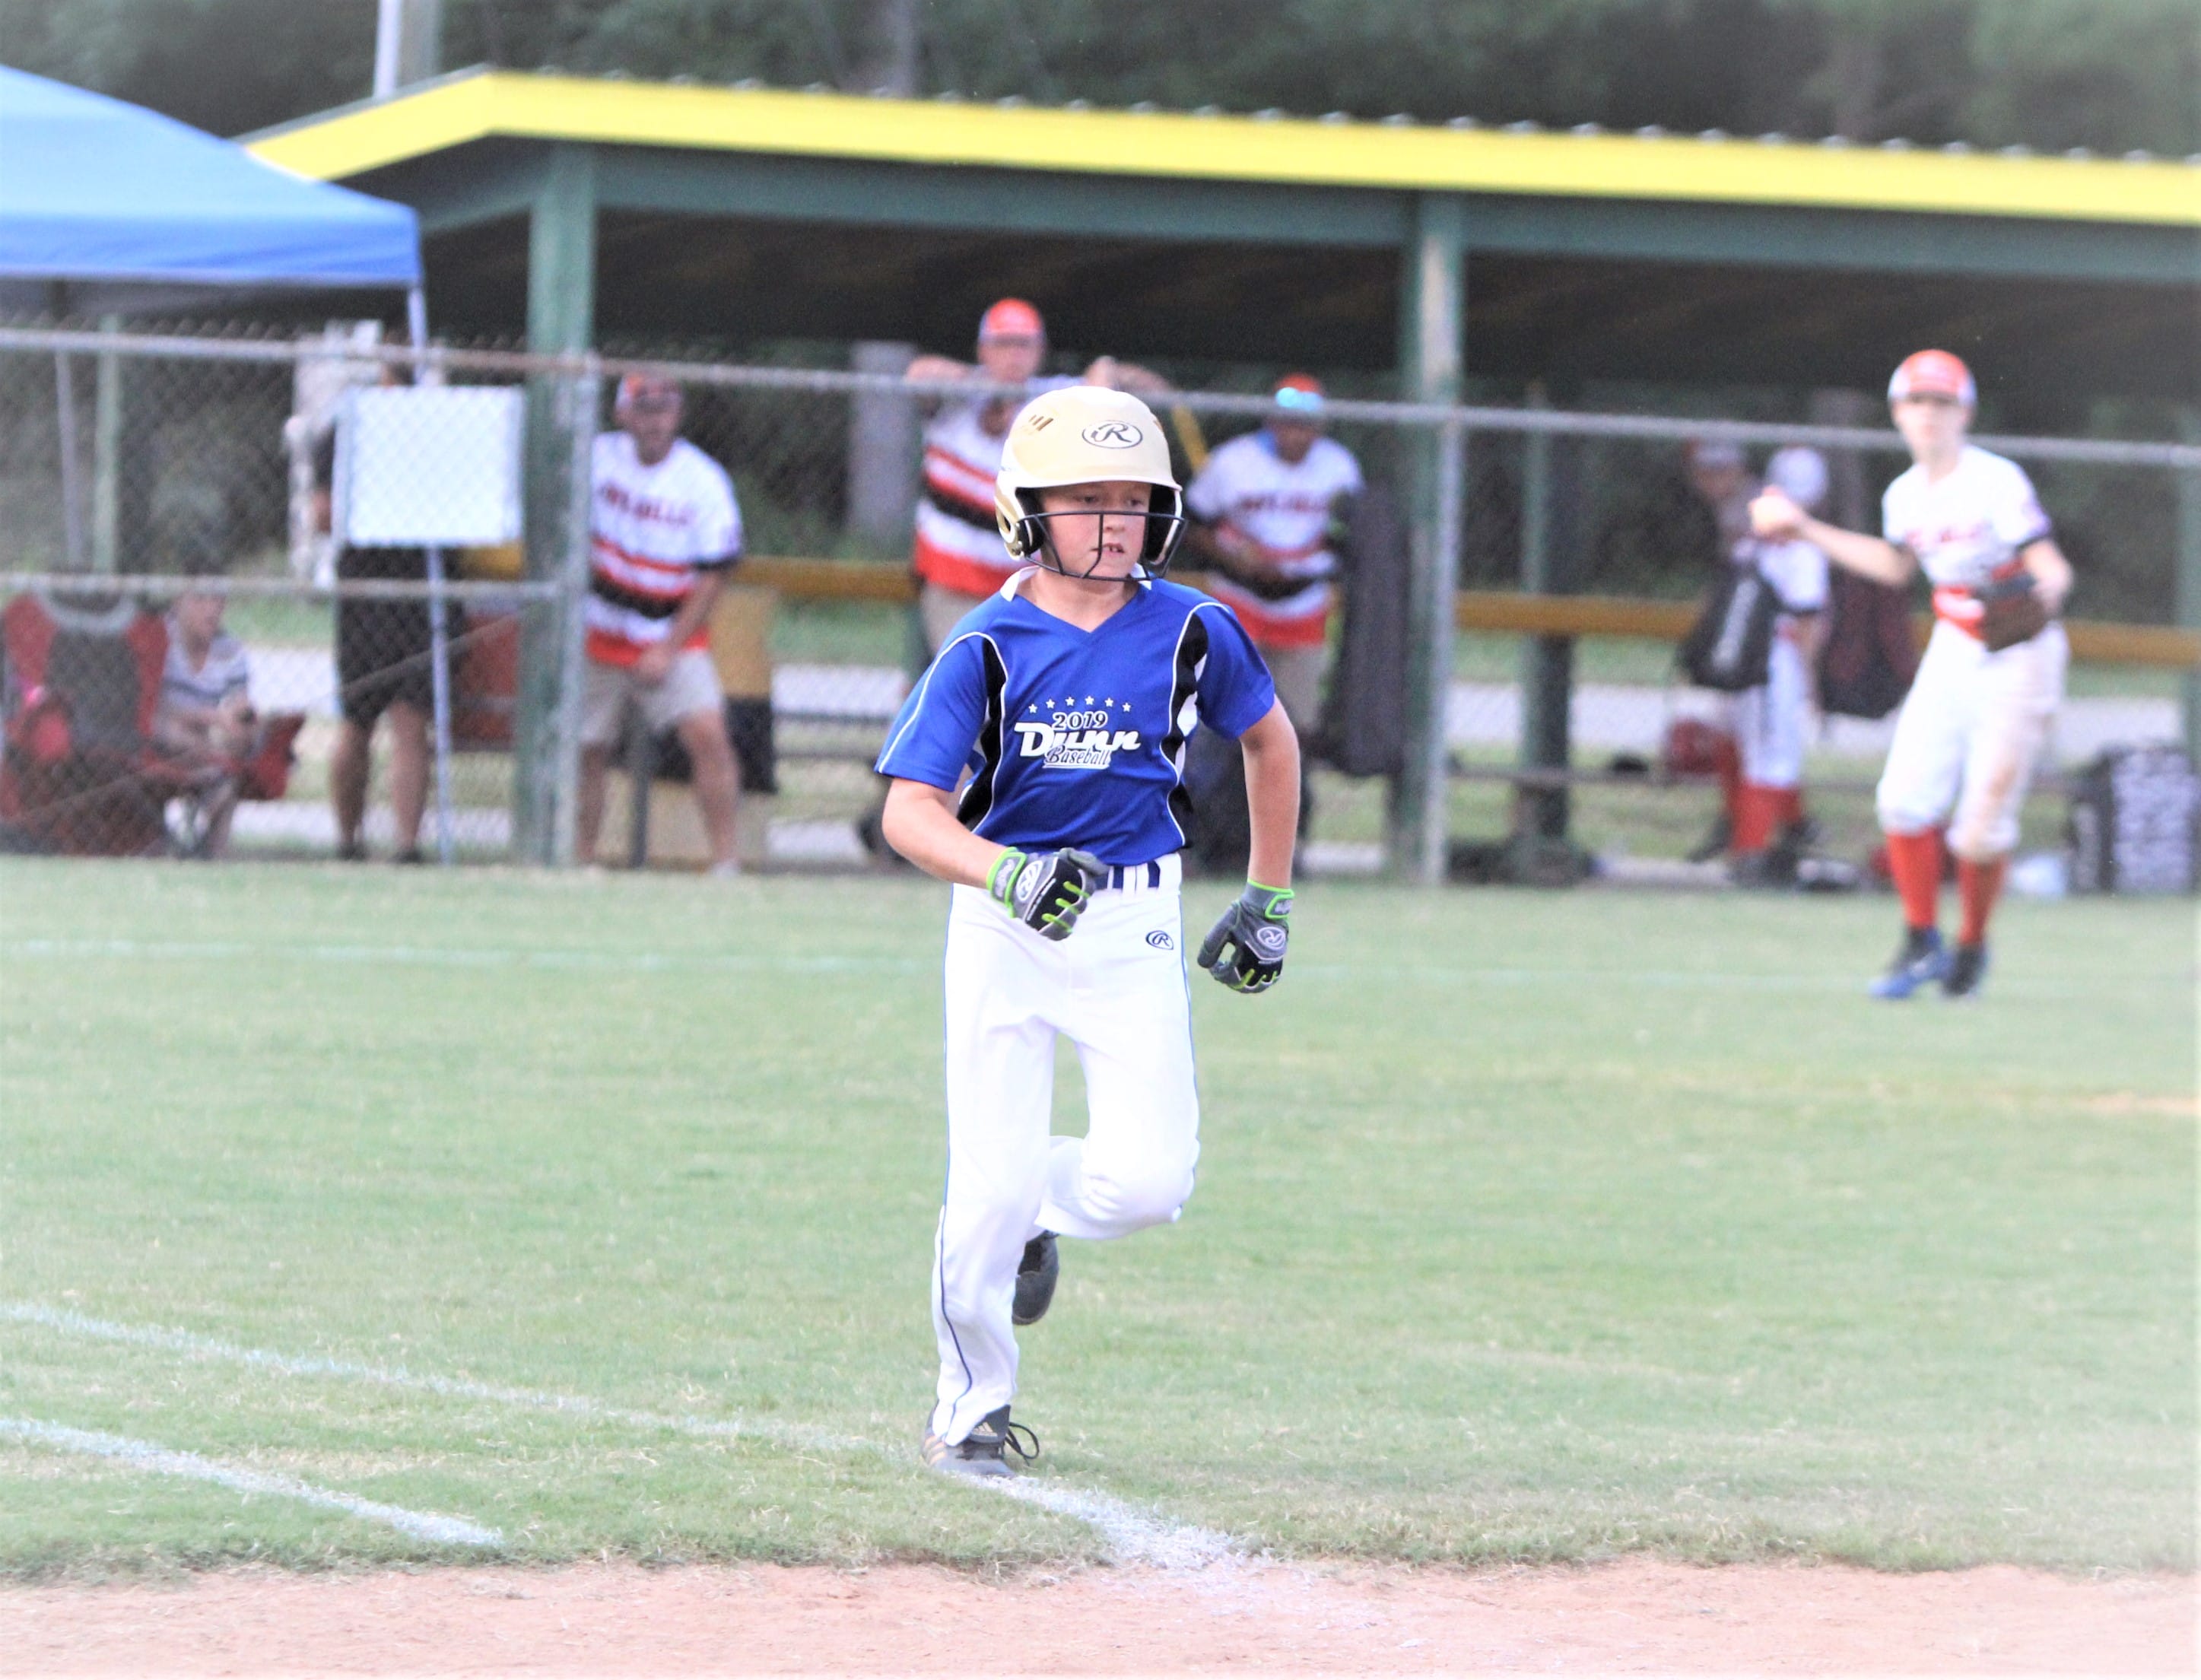 Dunn Majors win district title on Gilbert’s walk-off double